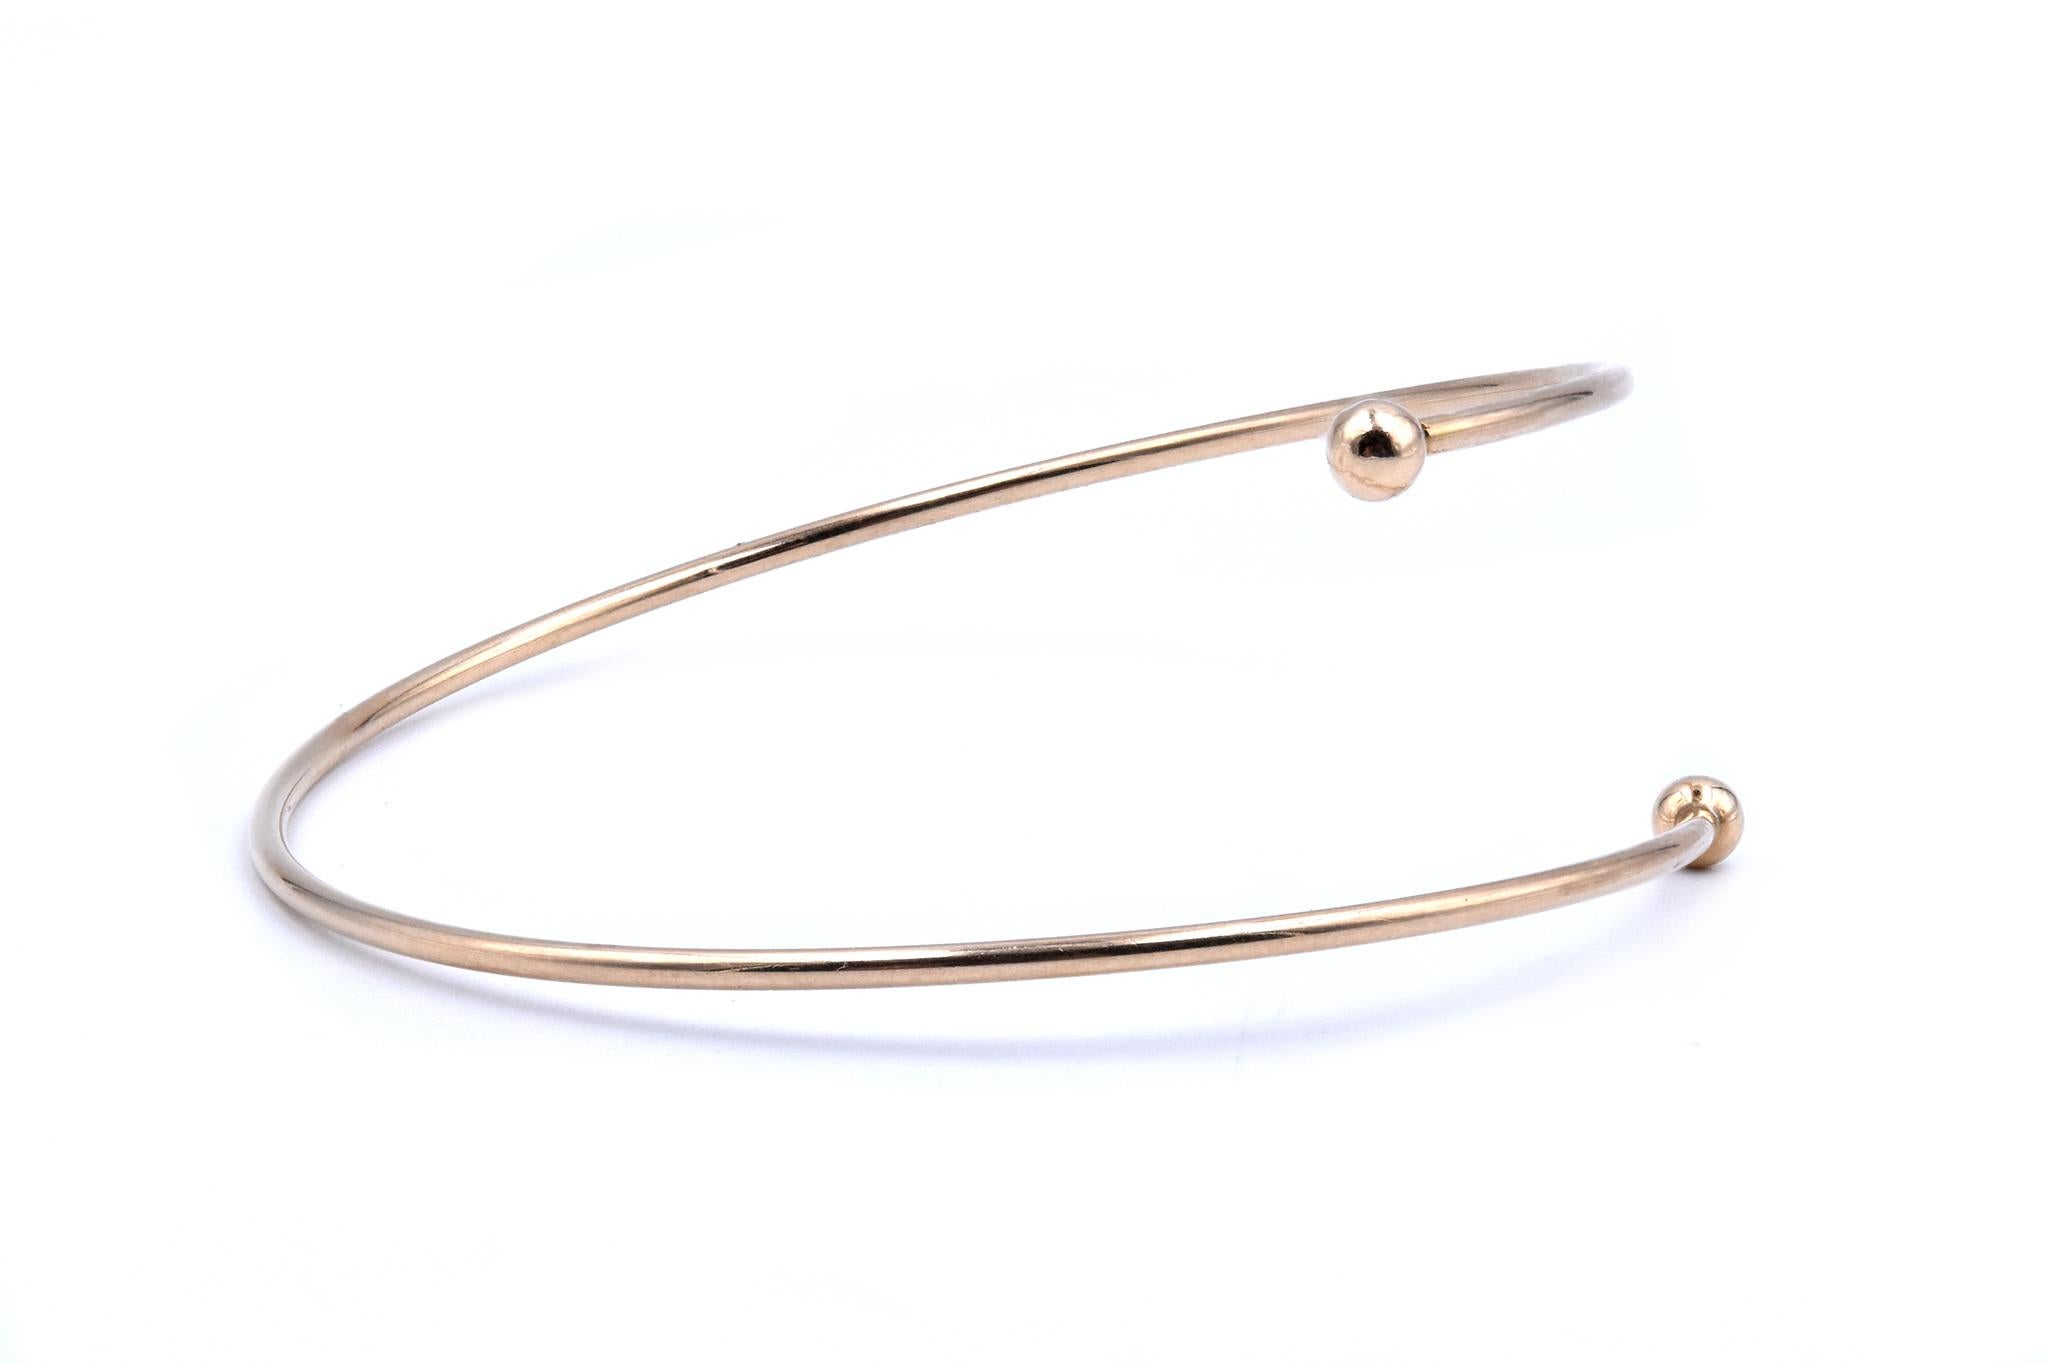 Designer: custom
Material: 14k yellow gold
Dimensions: the bracelet will fit up to a 7-inch wrist
Weight: 6.09 grams
